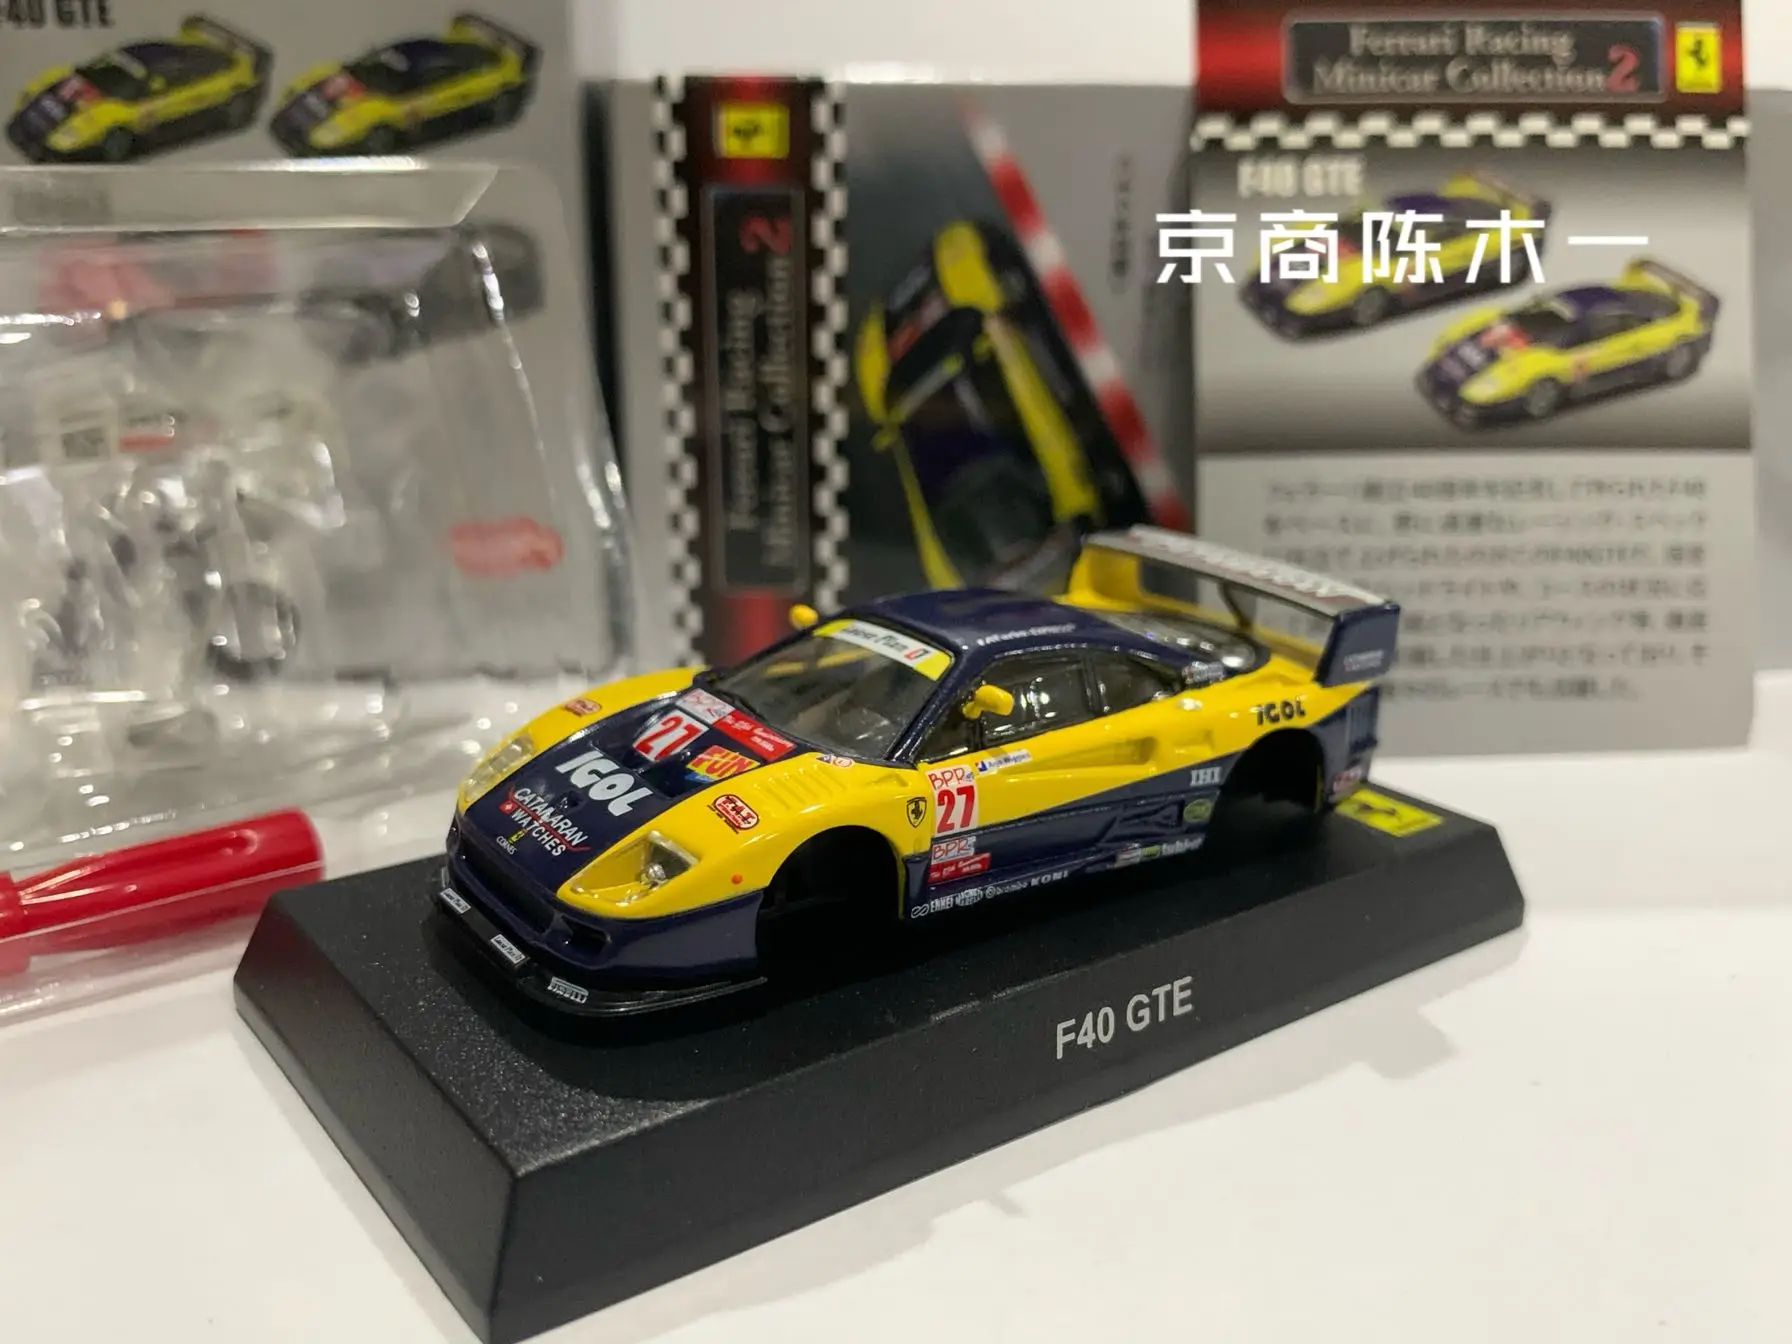 

1/64 KYOSHO Ferrari F40 GTE Classic #27 Collection of die-cast alloy assembled car decoration model toys